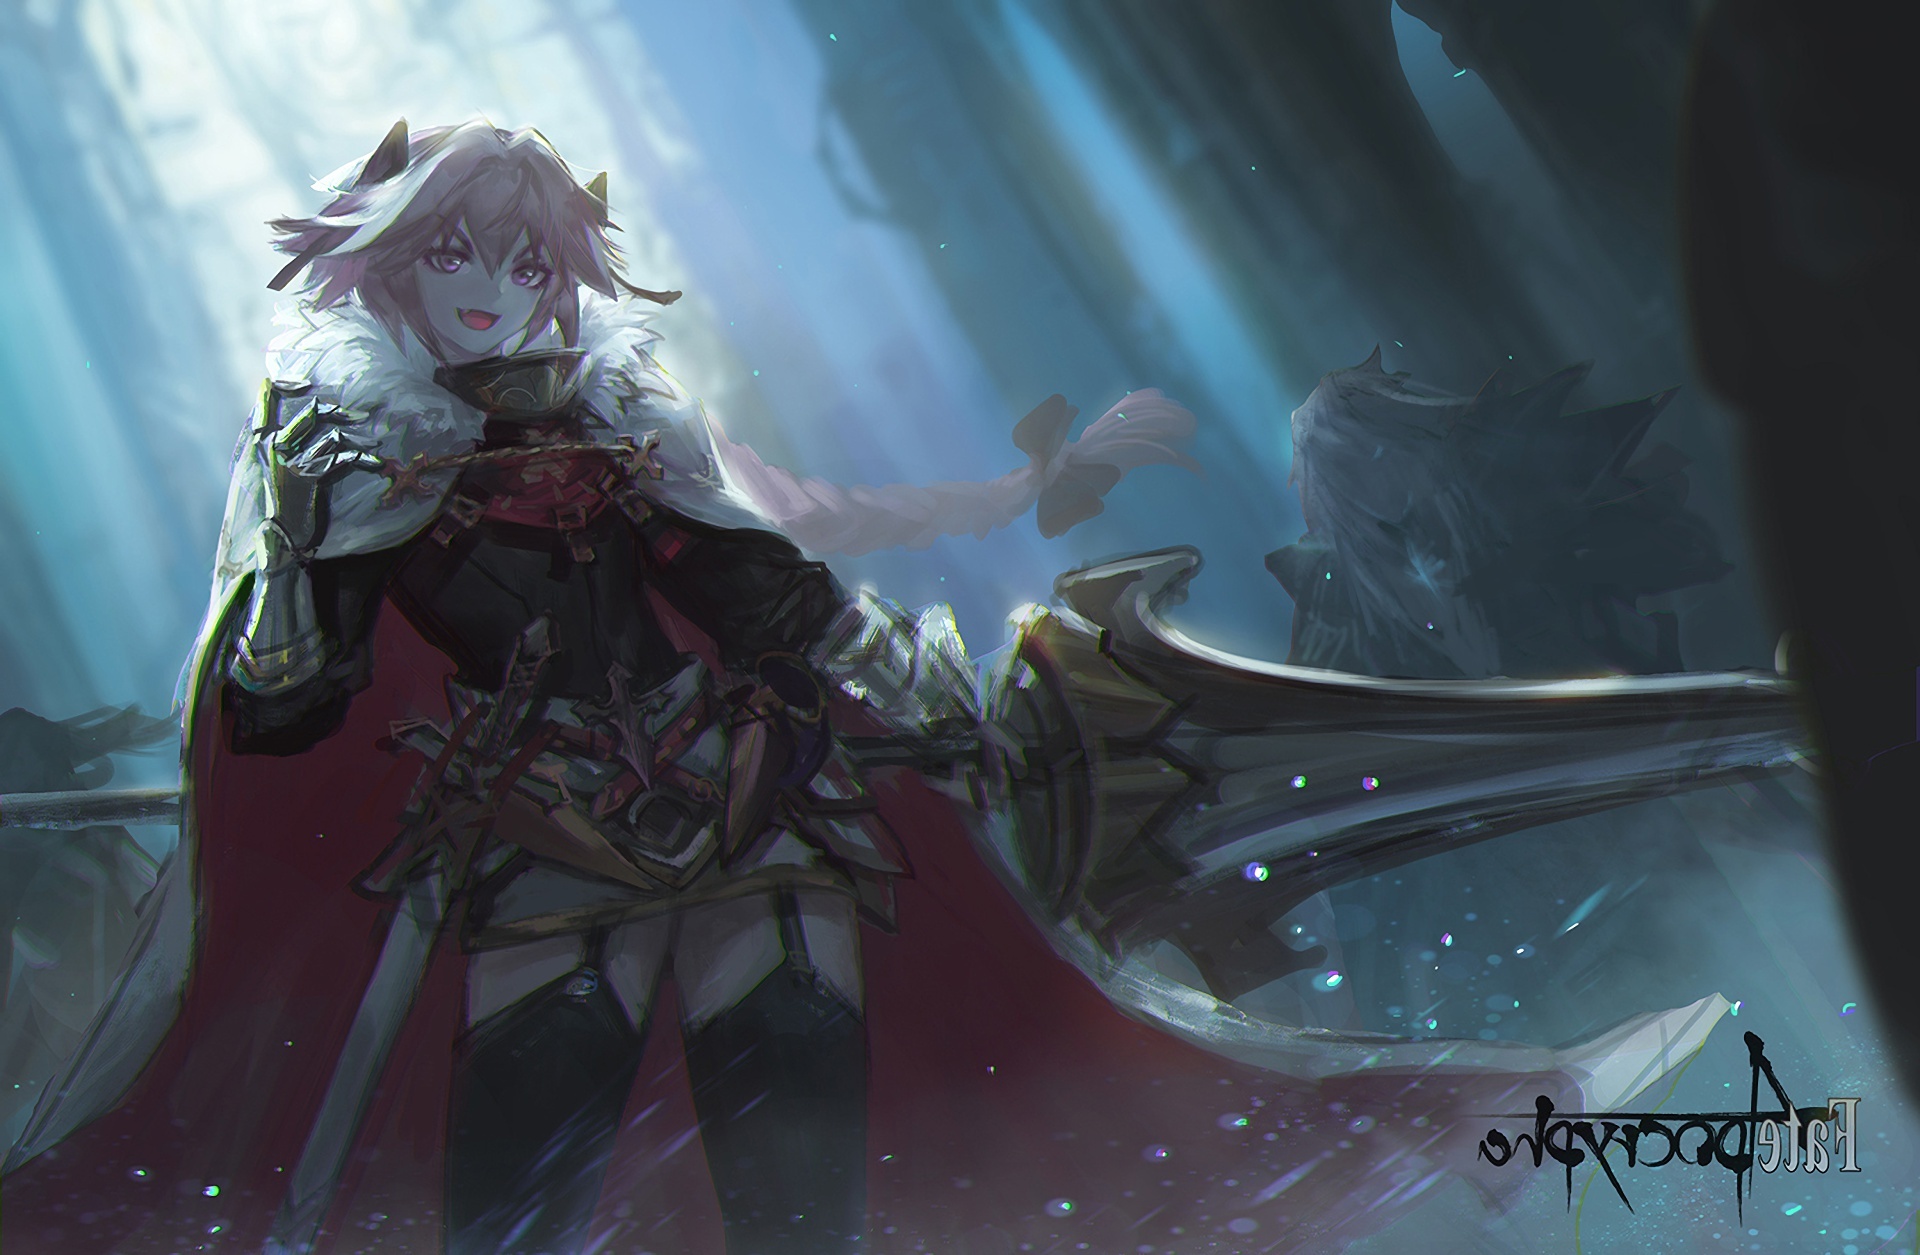 Wallpaper Astolfo Gloves Cape Rider Of Black Fate Apocrypha Smiling Sword Resolution 19x1255 Wallpx